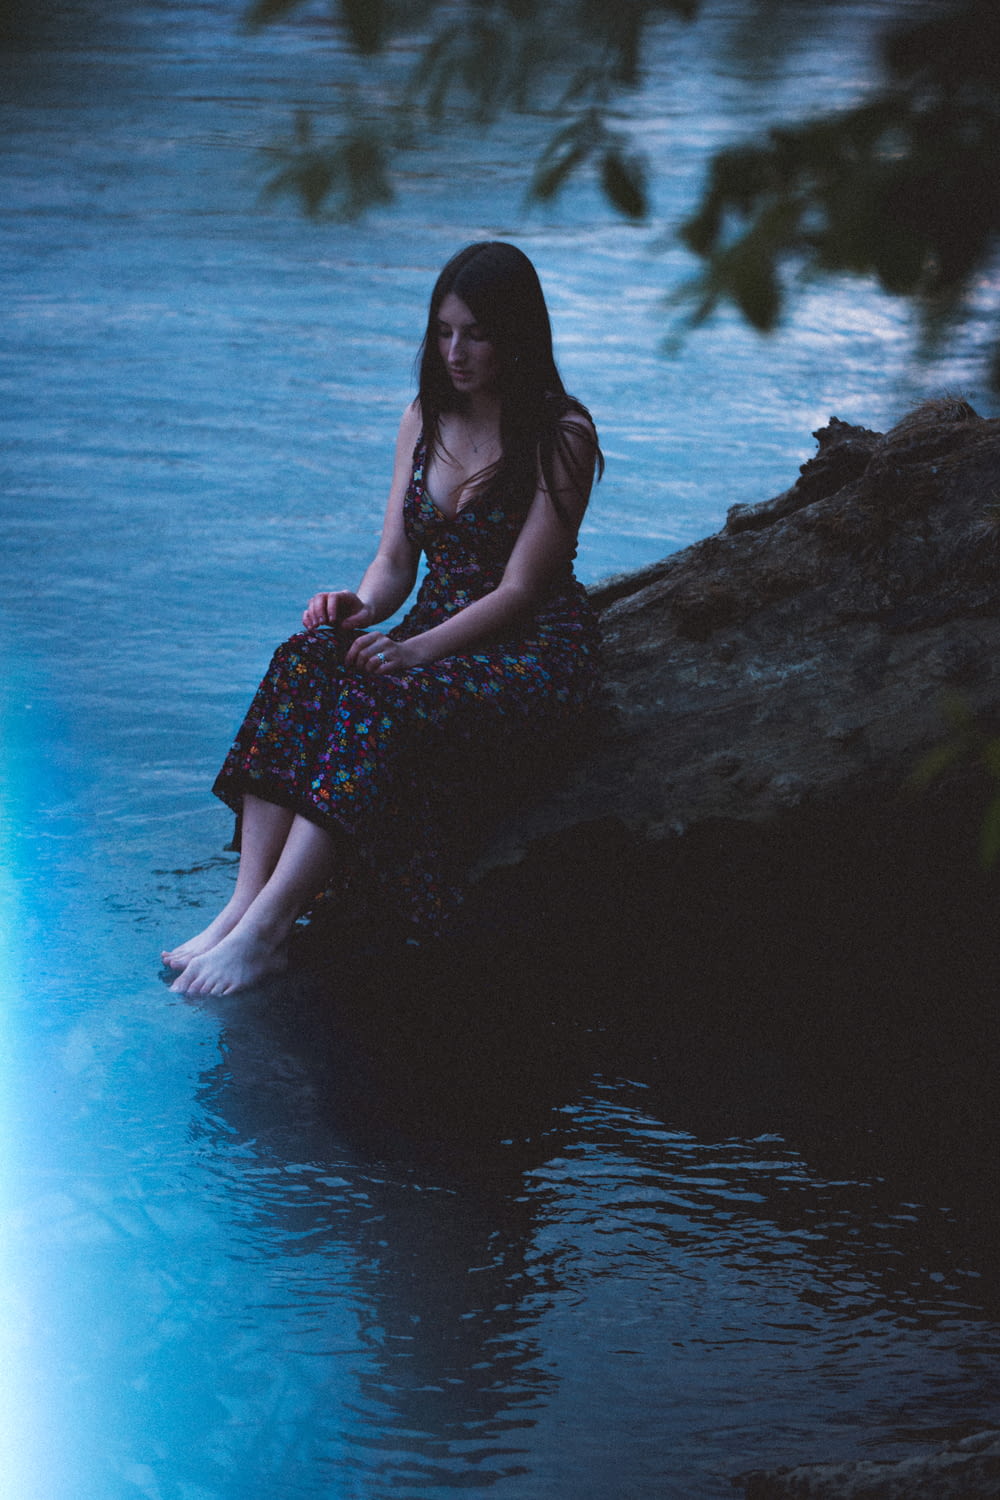 woman in black and red floral dress sitting on rock near body of water during daytime